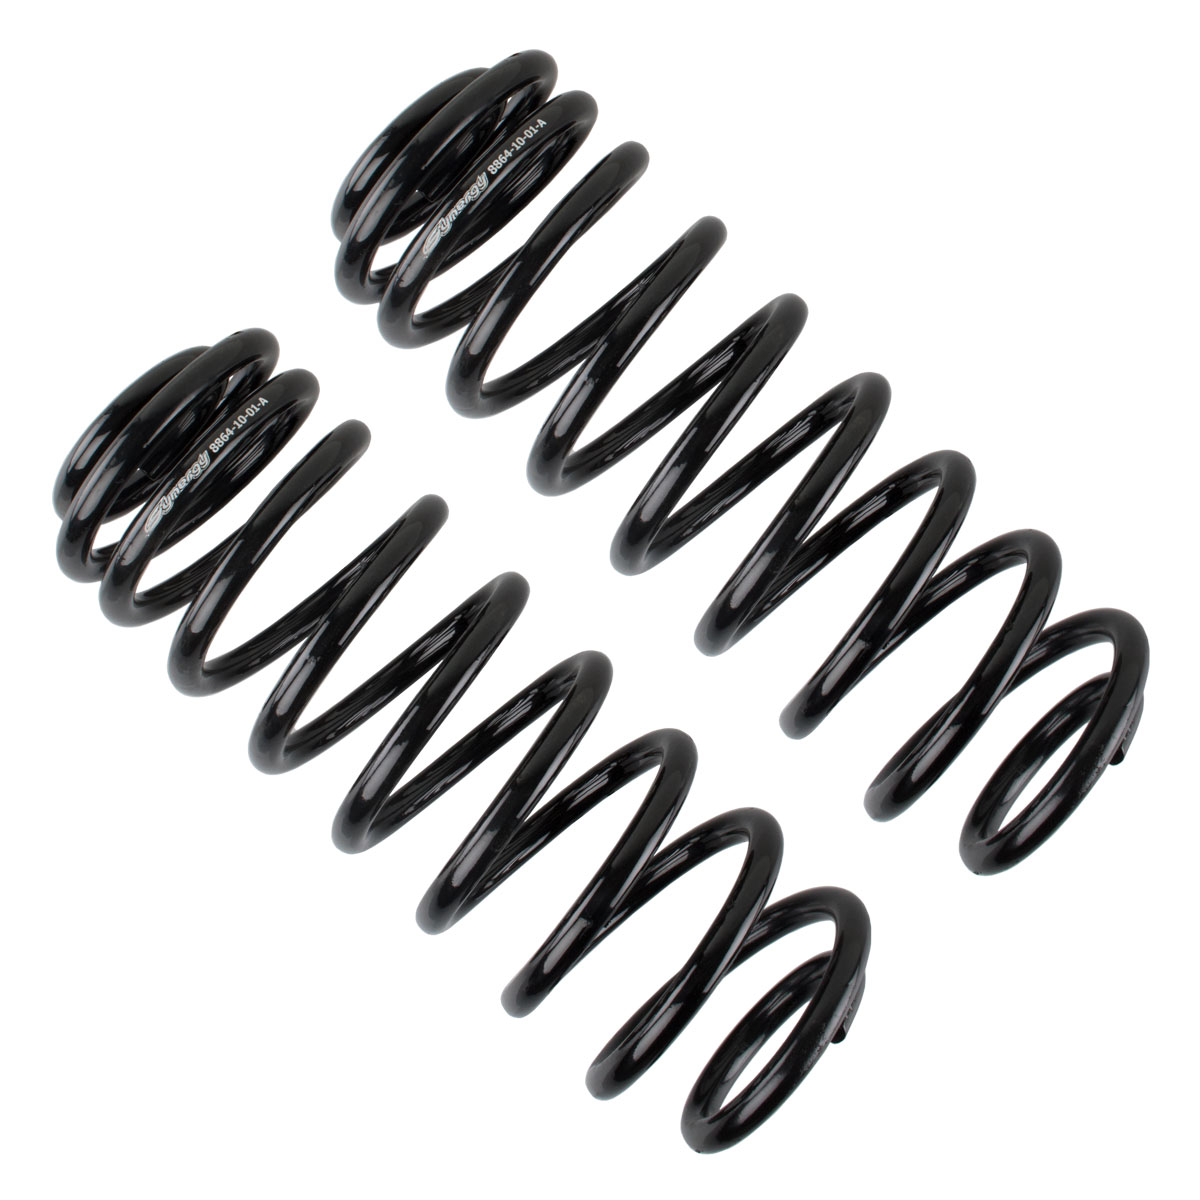 Synergy Manufacturing Rear Coil Springs  - JL 2DR 4in Lift / 4Dr 3in Lift  - JL